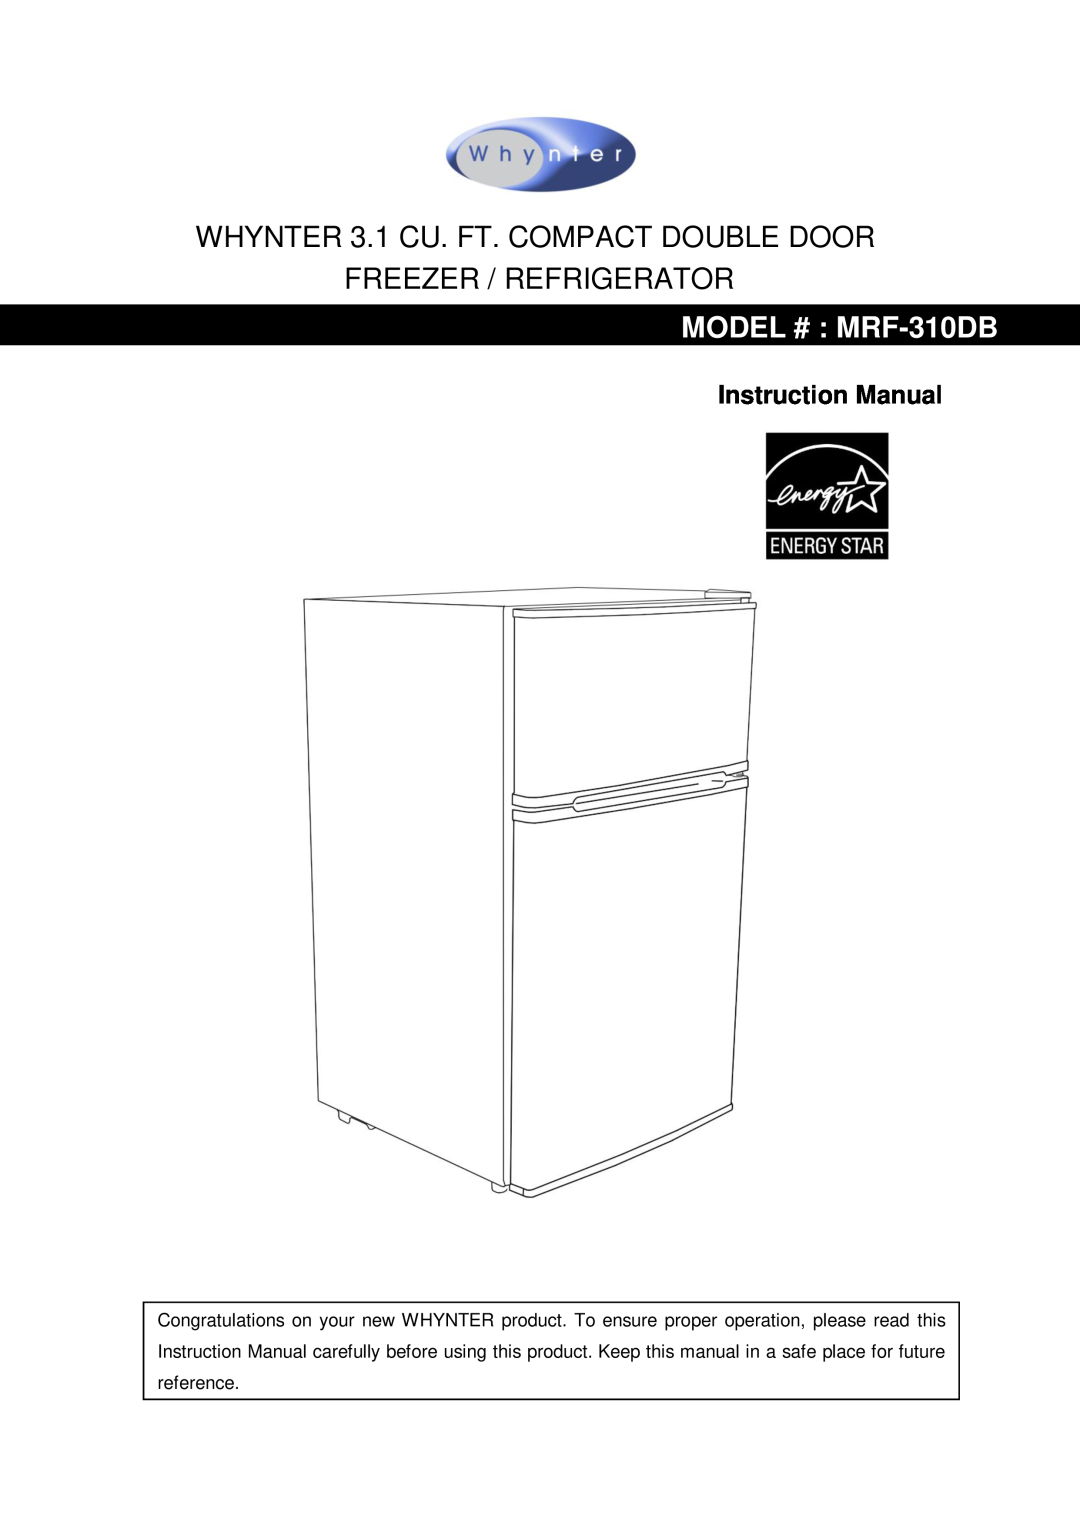 Whynter instruction manual WHYNTER 3.1 CU. FT. COMPACT DOUBLE DOOR, Freezer / Refrigerator, MODEL # MRF-310DB 